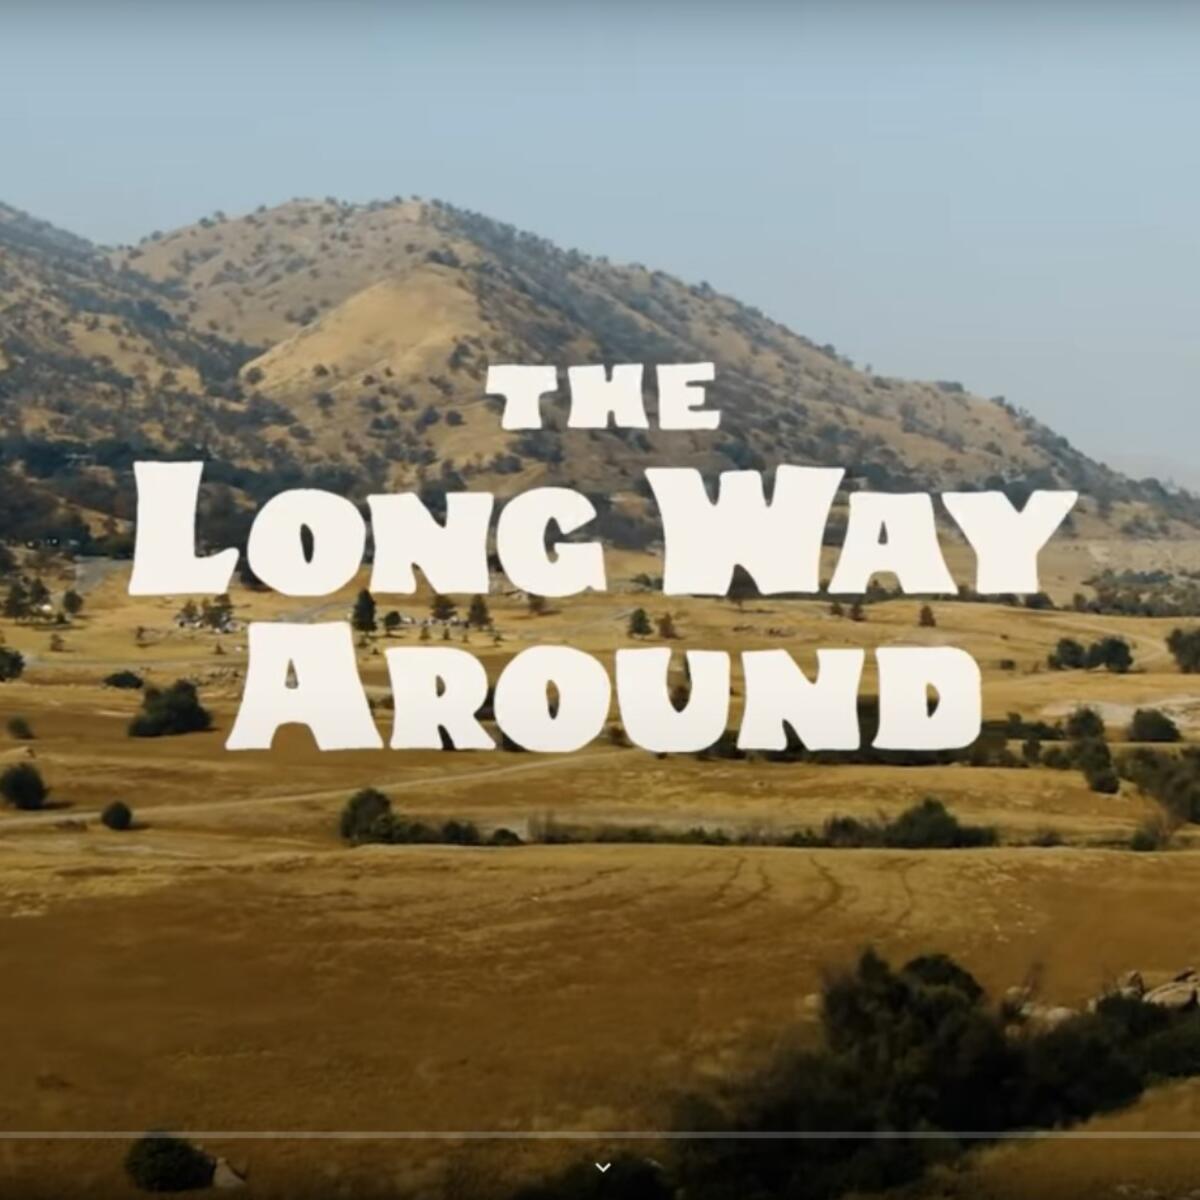 "The Long Way Around" takes viewers bike-packing in the Sierra.